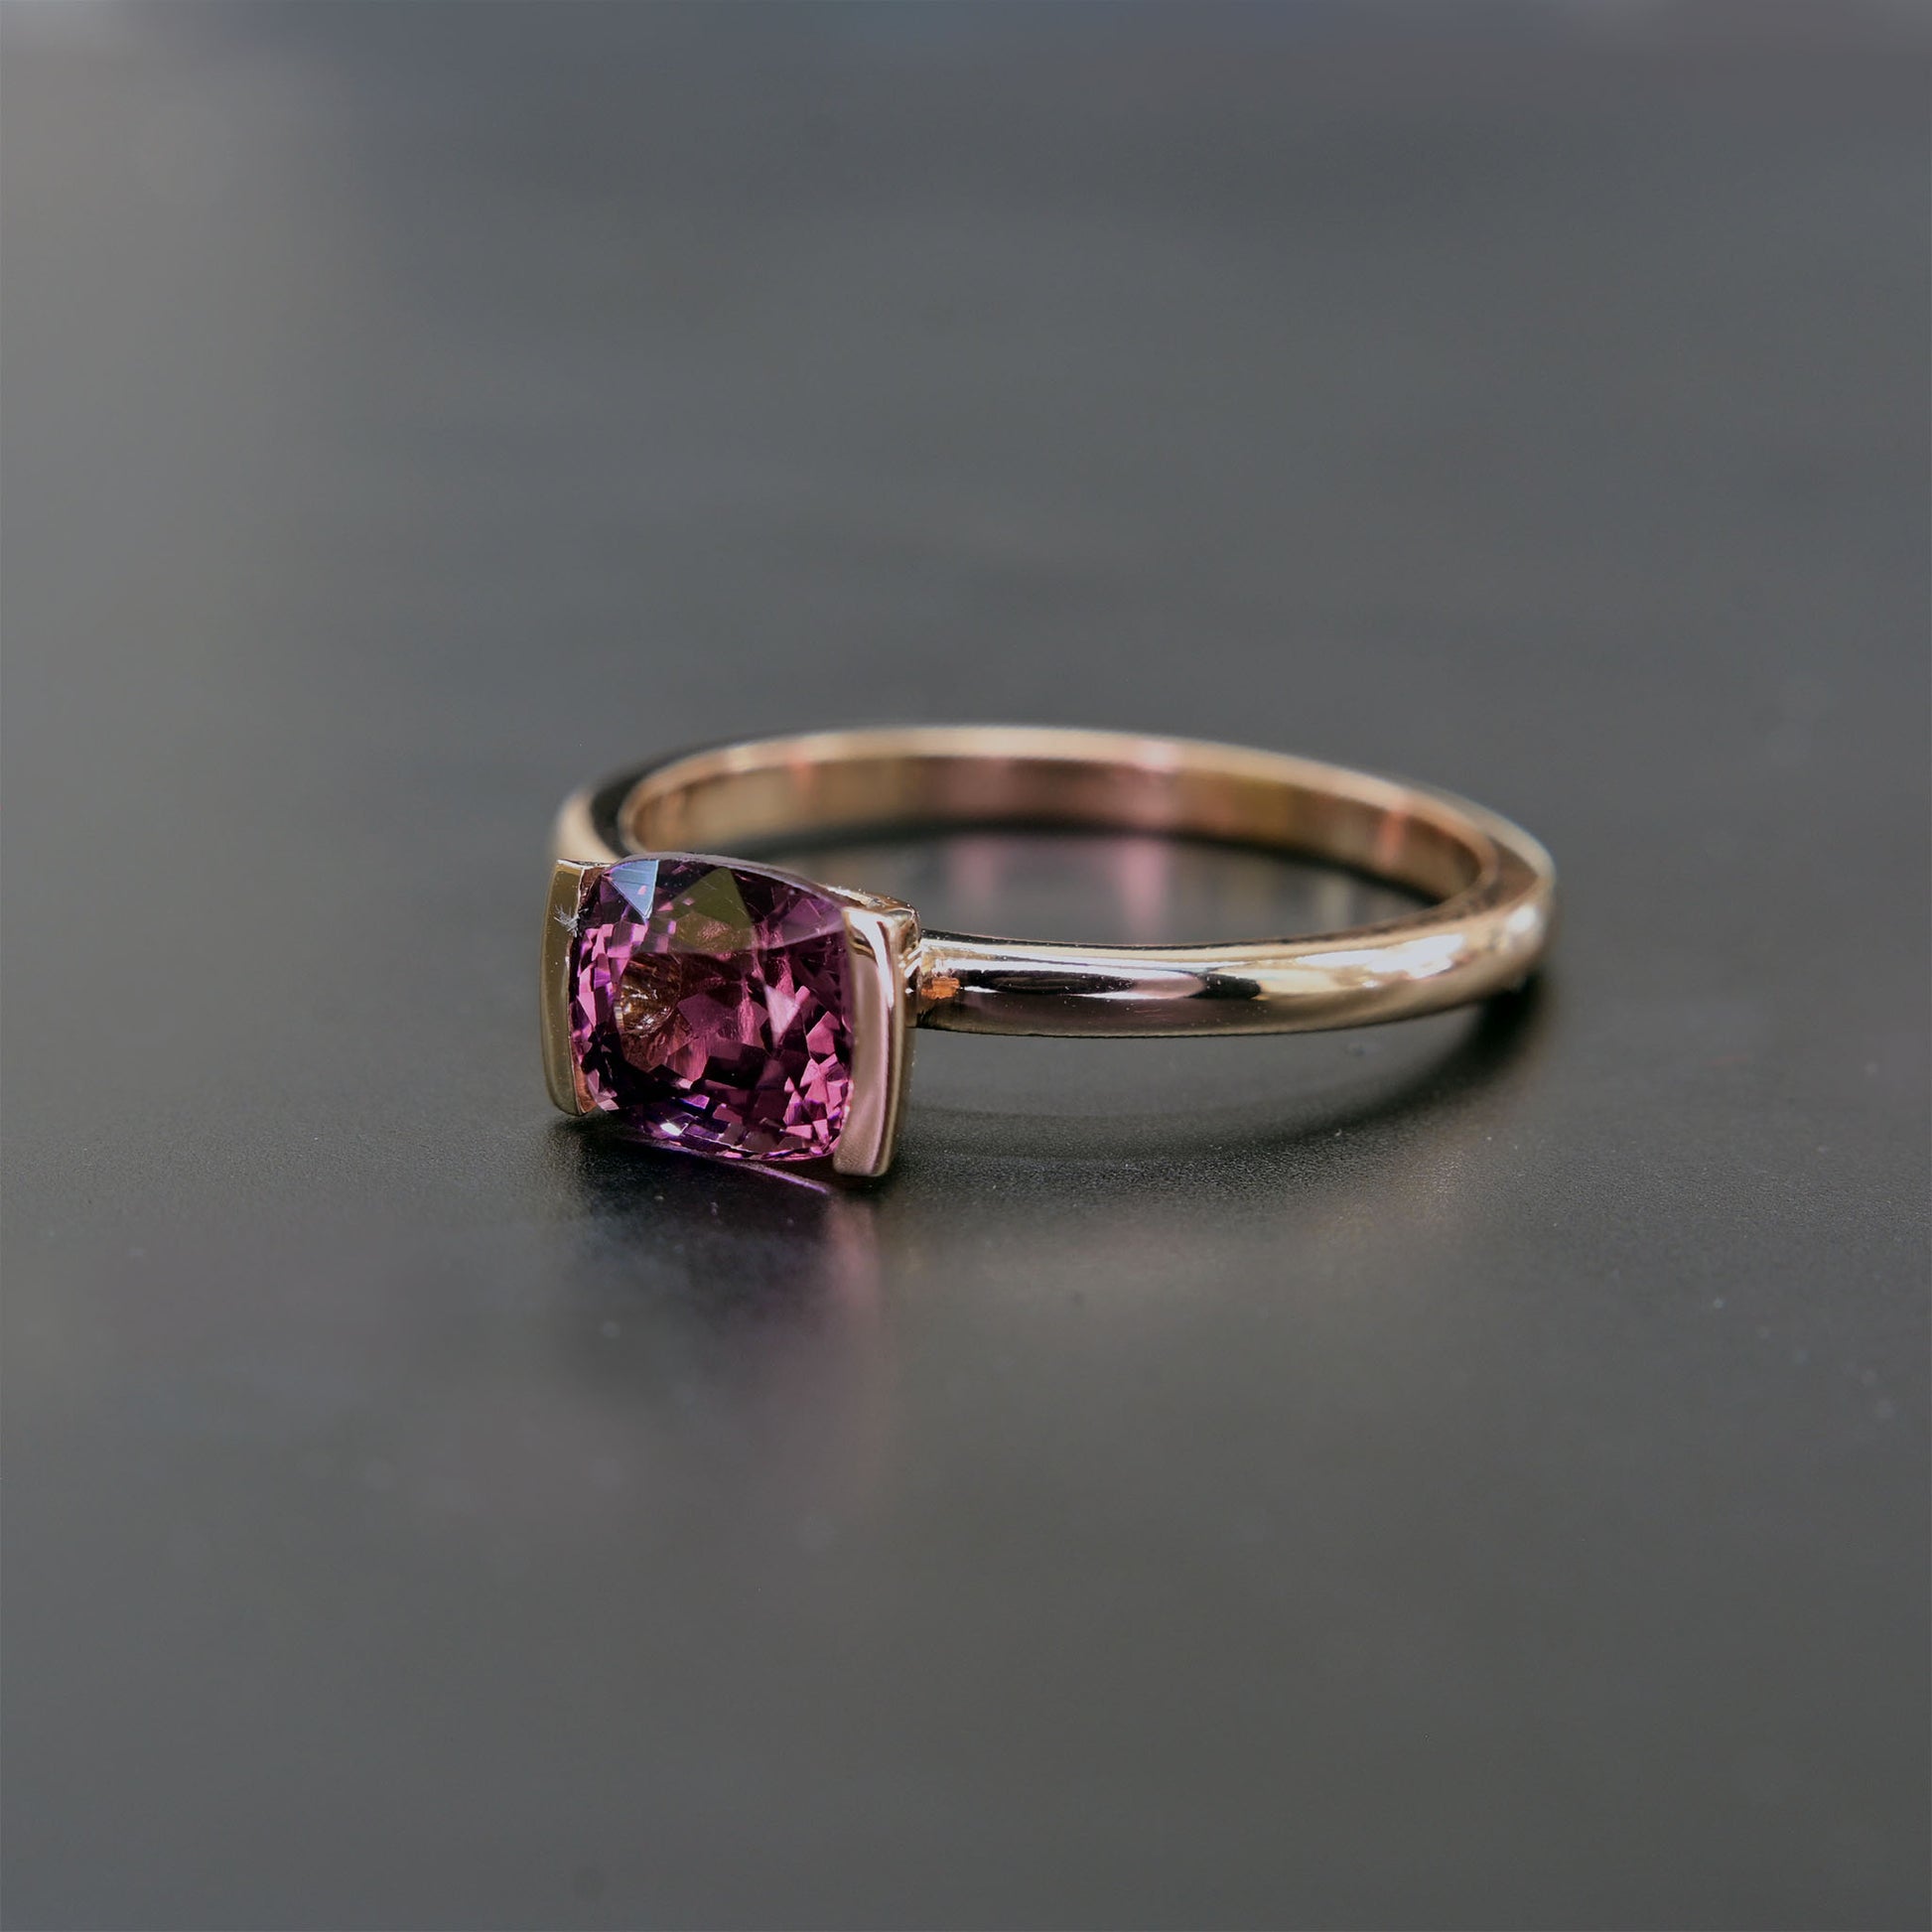 Purple pink spinel ring in rose gold setting